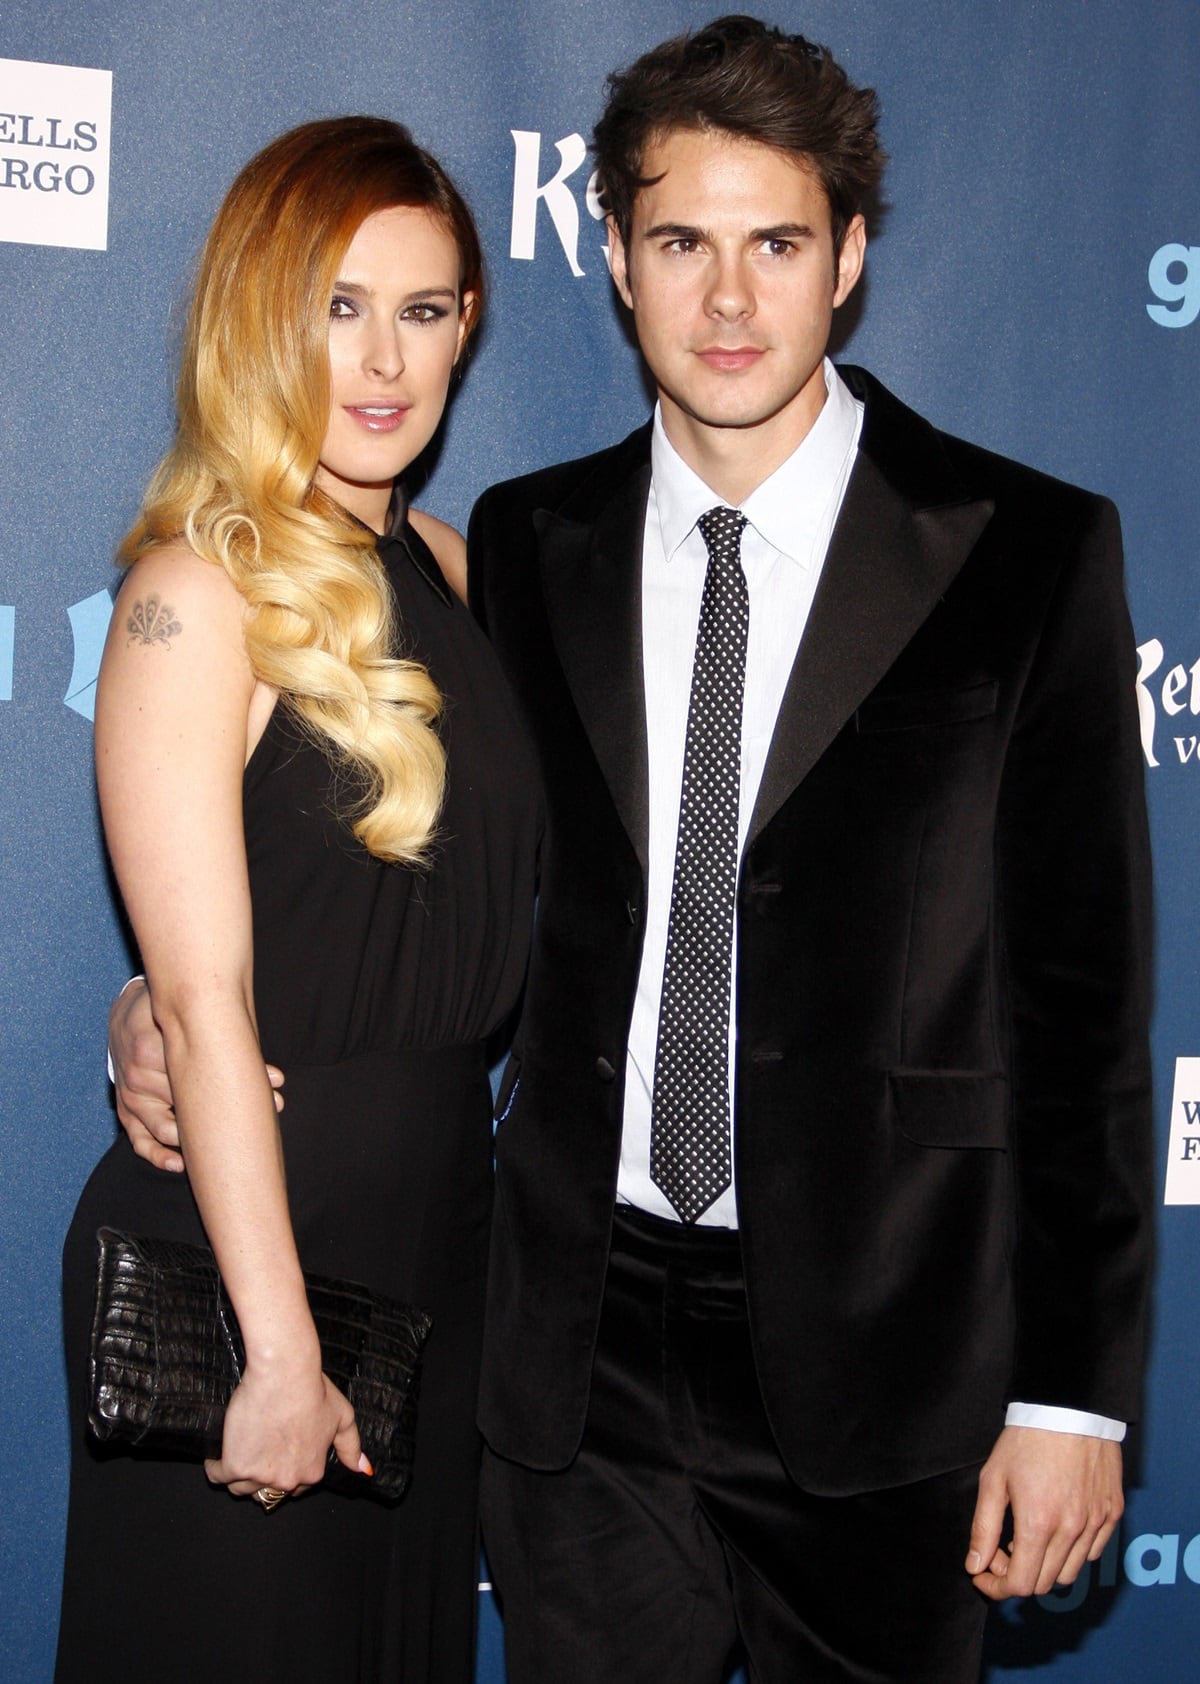 Rumer Willis and Jayson Blair were rumored to be dating in 2012 and 2013